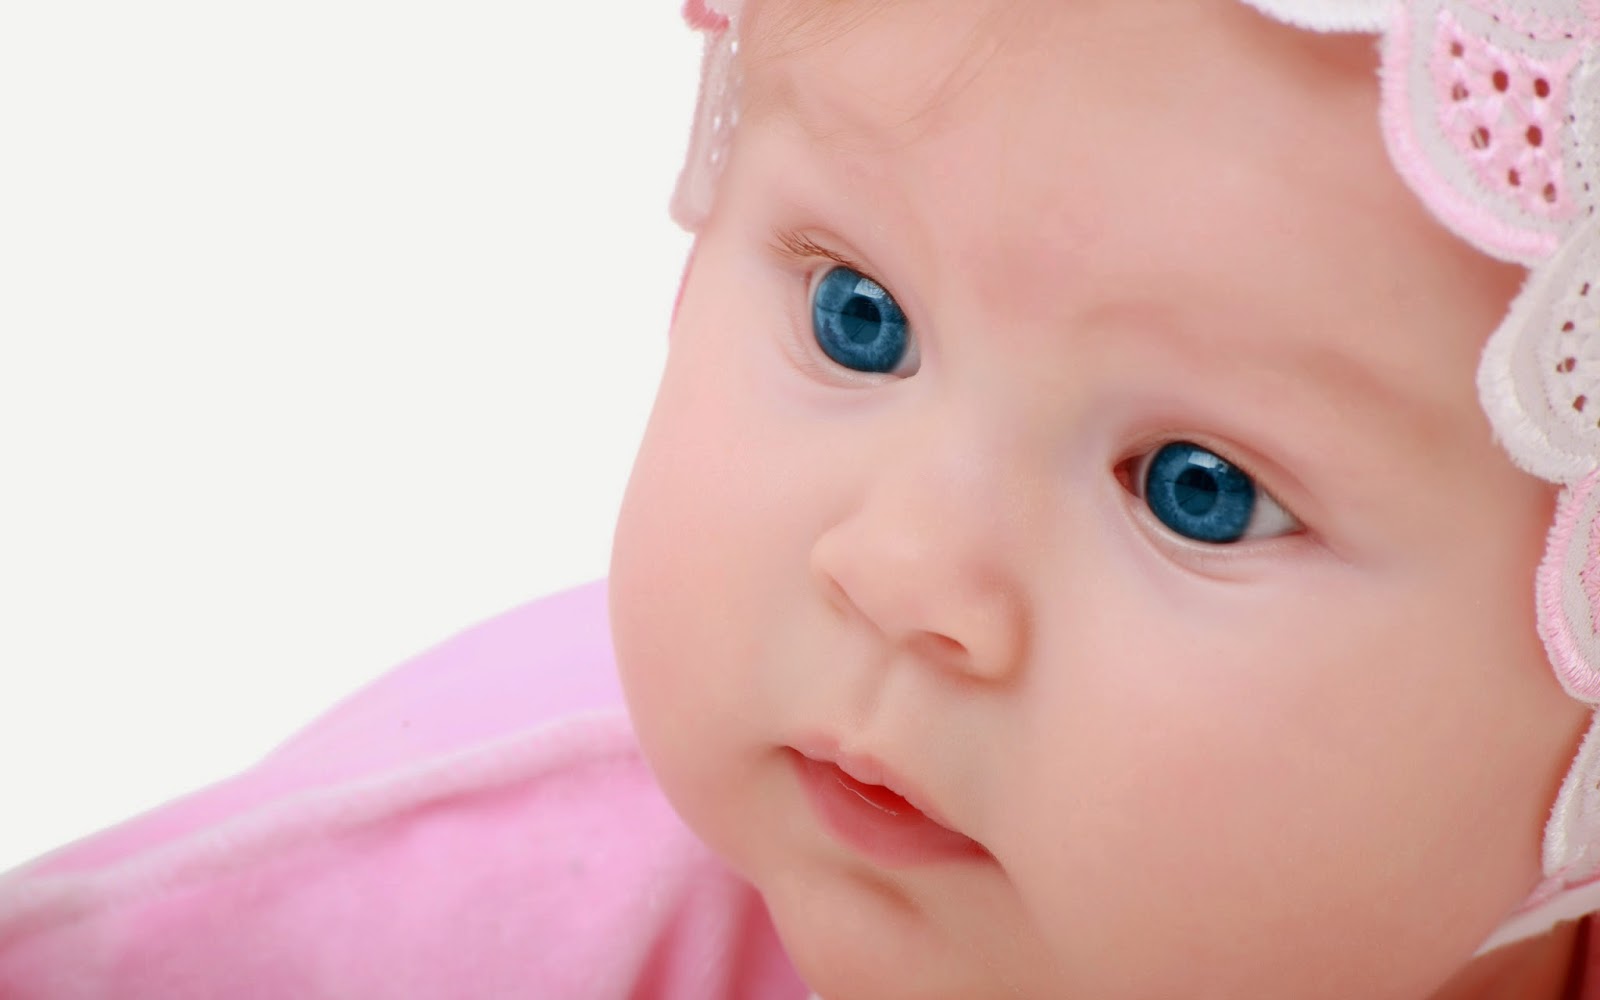 1. Baby girl with dark hair and blue eyes - wide 11